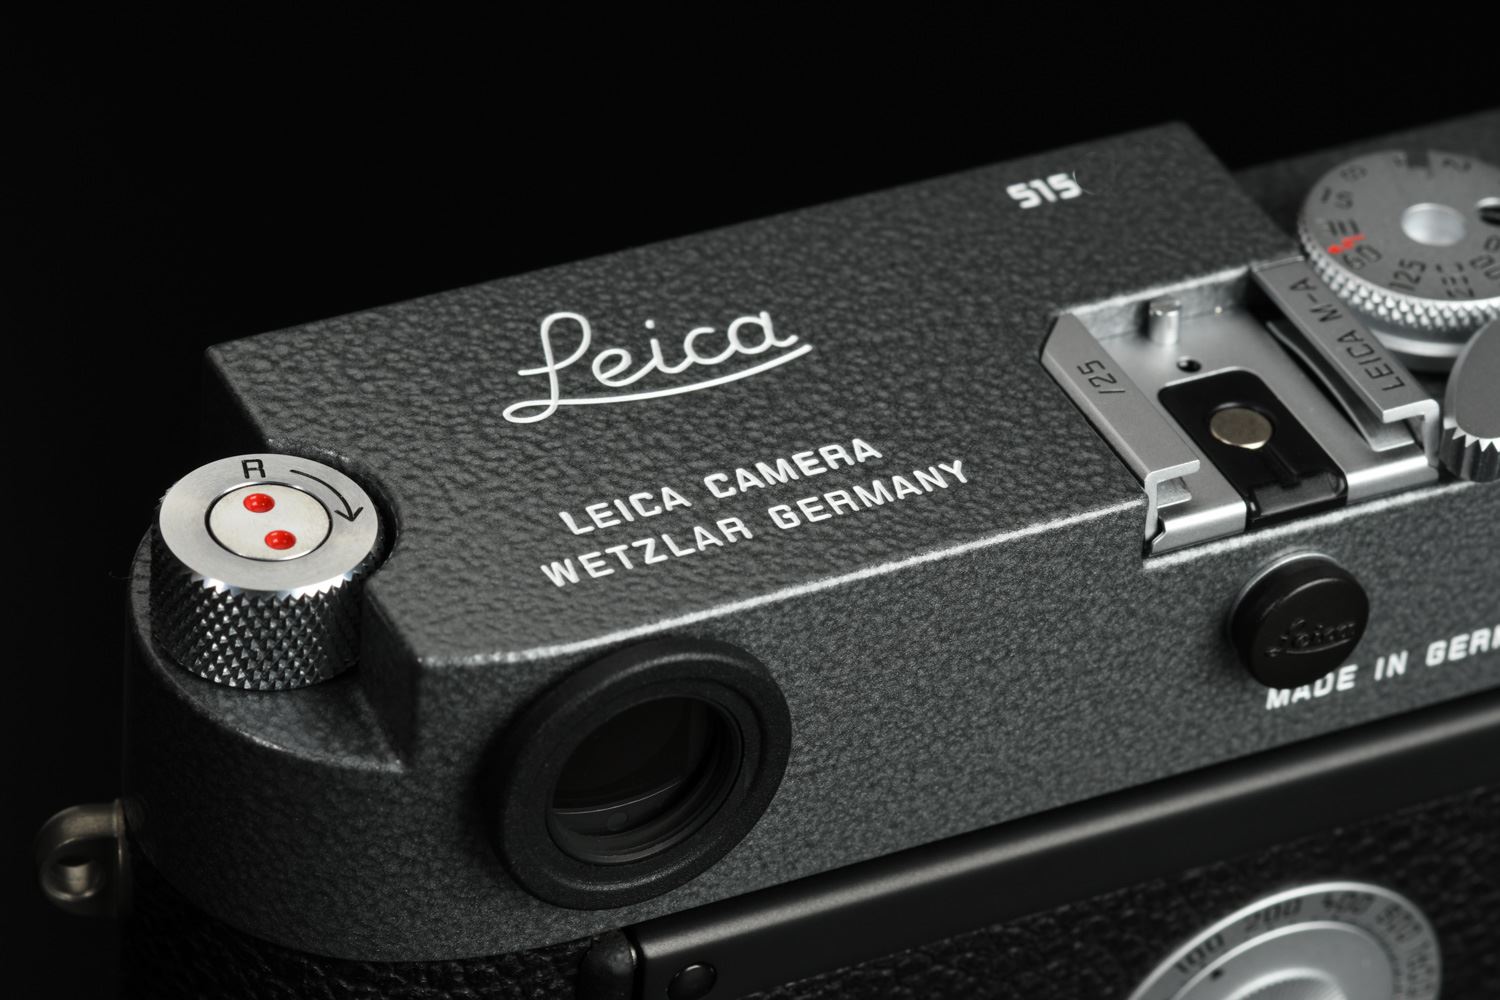 Picture of Leica M-A "Leica Shop Vienna" 25 Jahre Hammertone with Noctilux-M 50mm f/0.95 Set